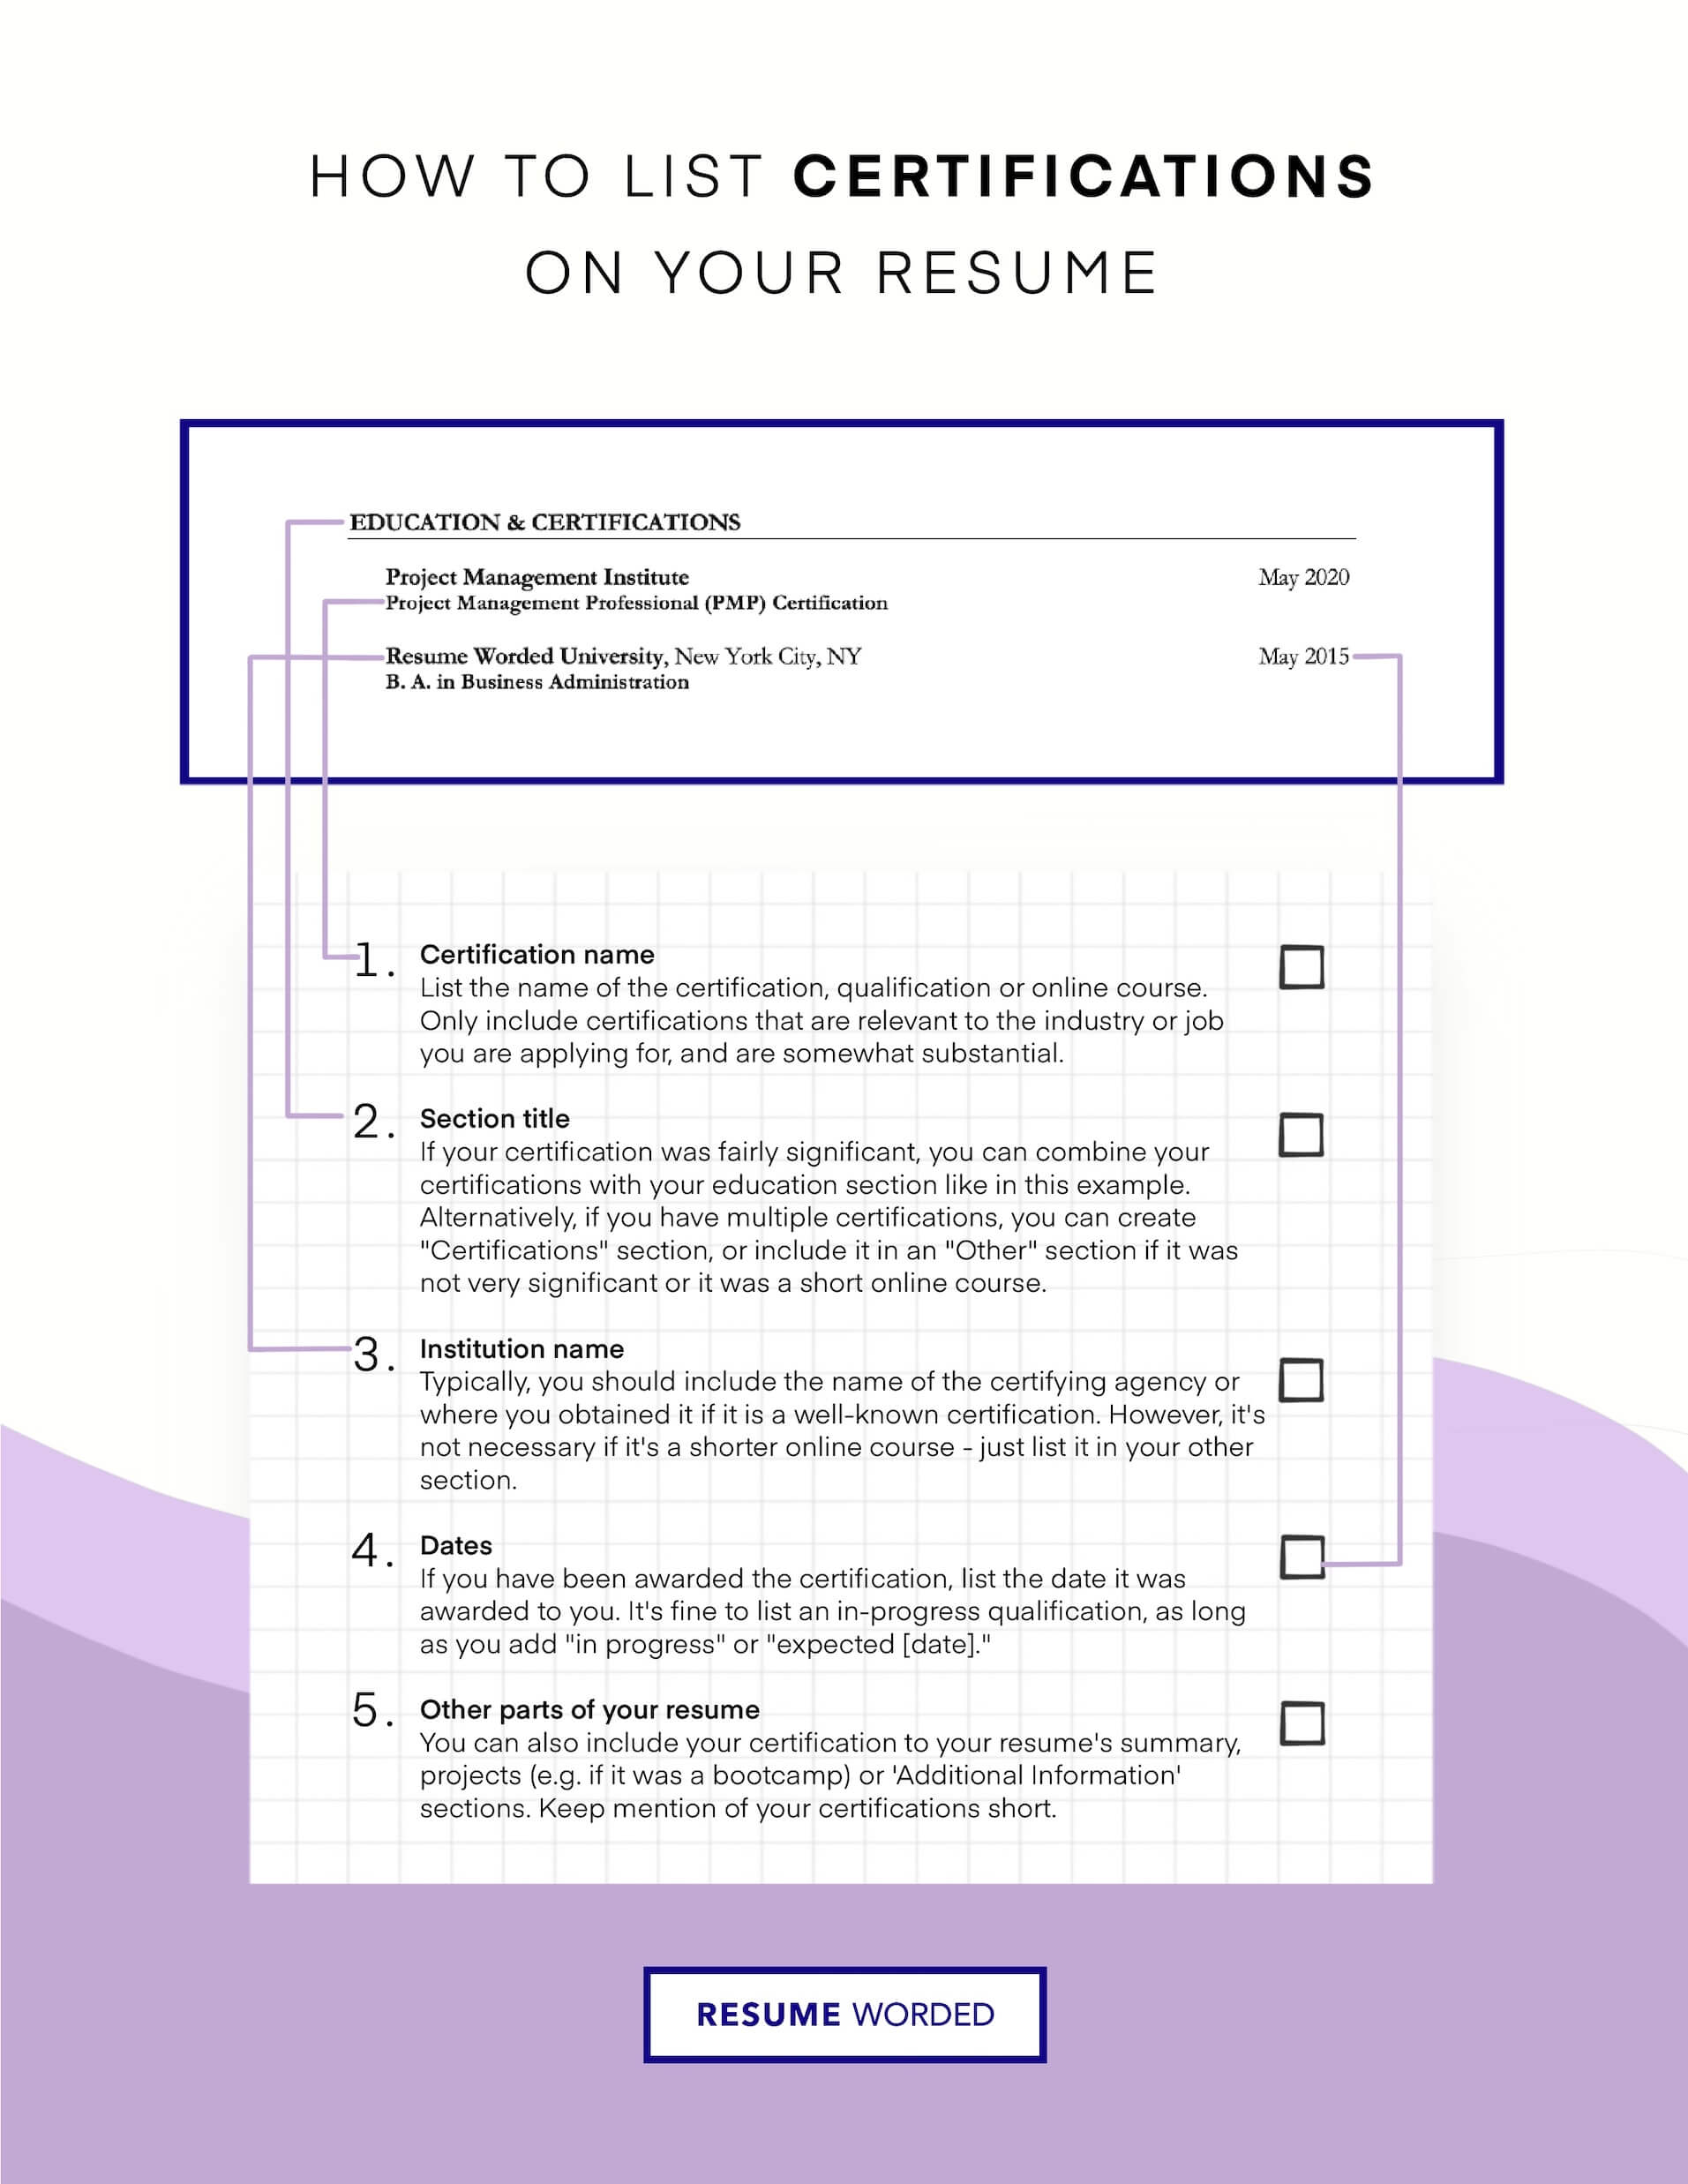 Include any engineering certification. - Materials Engineer Resume